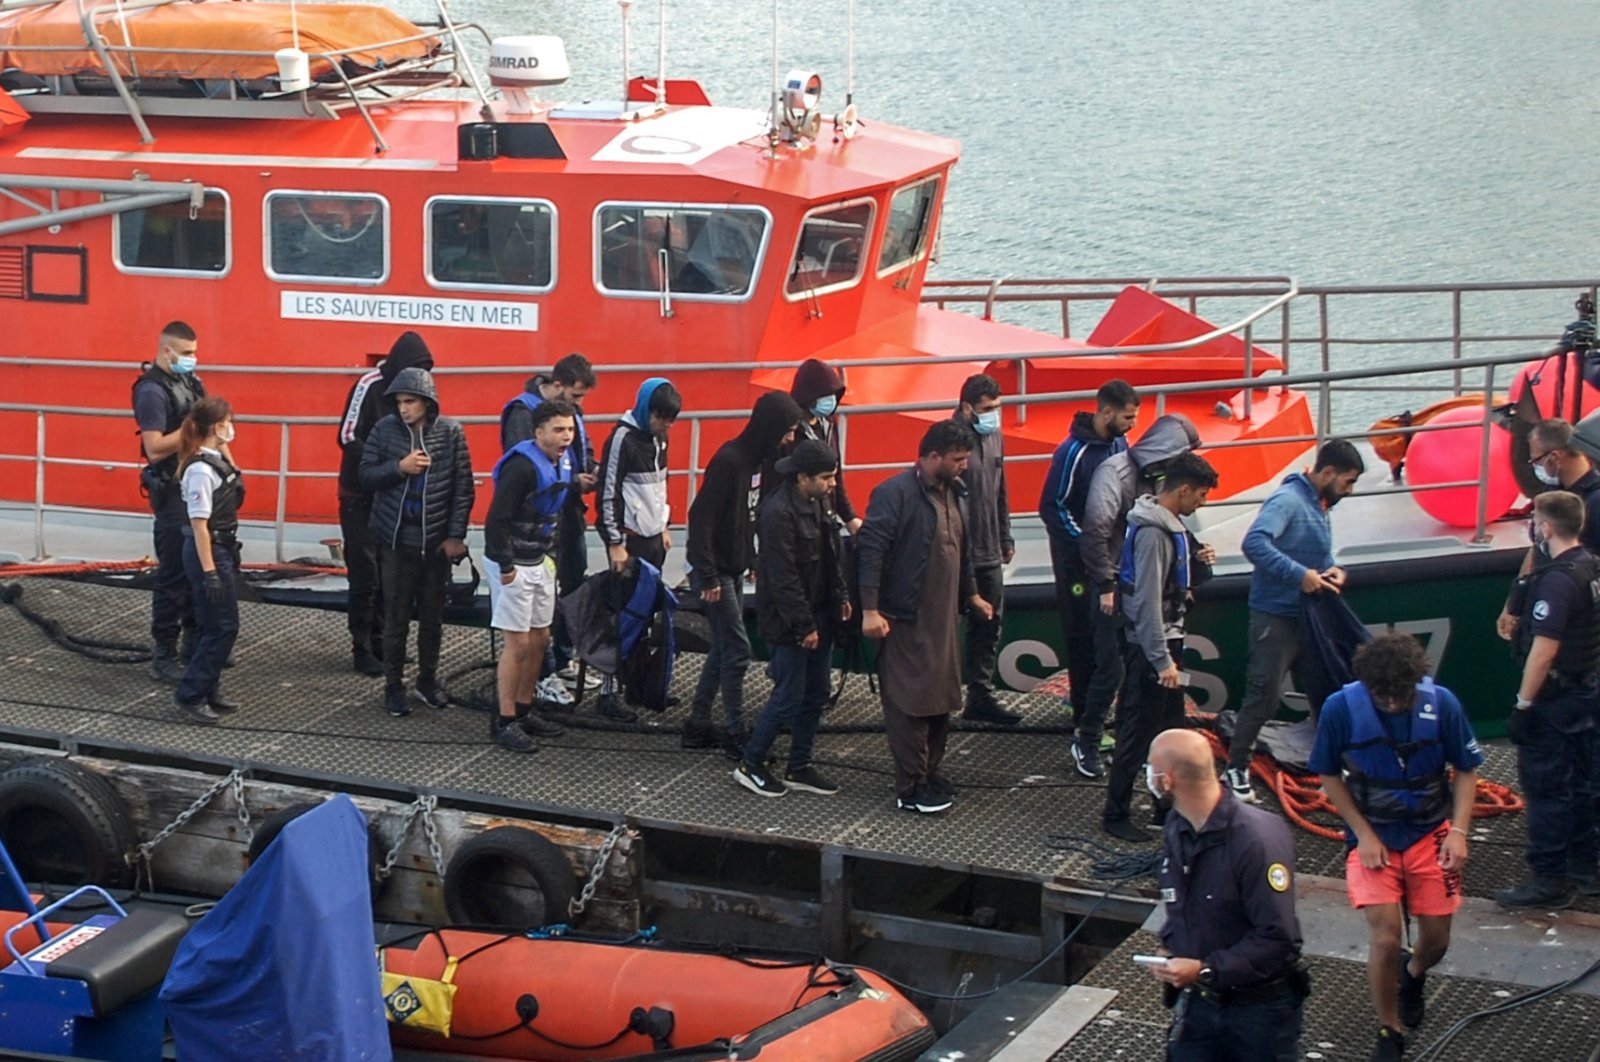 Iraqi, Iranian and Afghan migrants, with two minors among their number, disembark from a vessel after being rescued as their inflatable boat was filling with water on the English Channel, in Calais, northern France on Sept. 15, 2021. (AFP Photo)